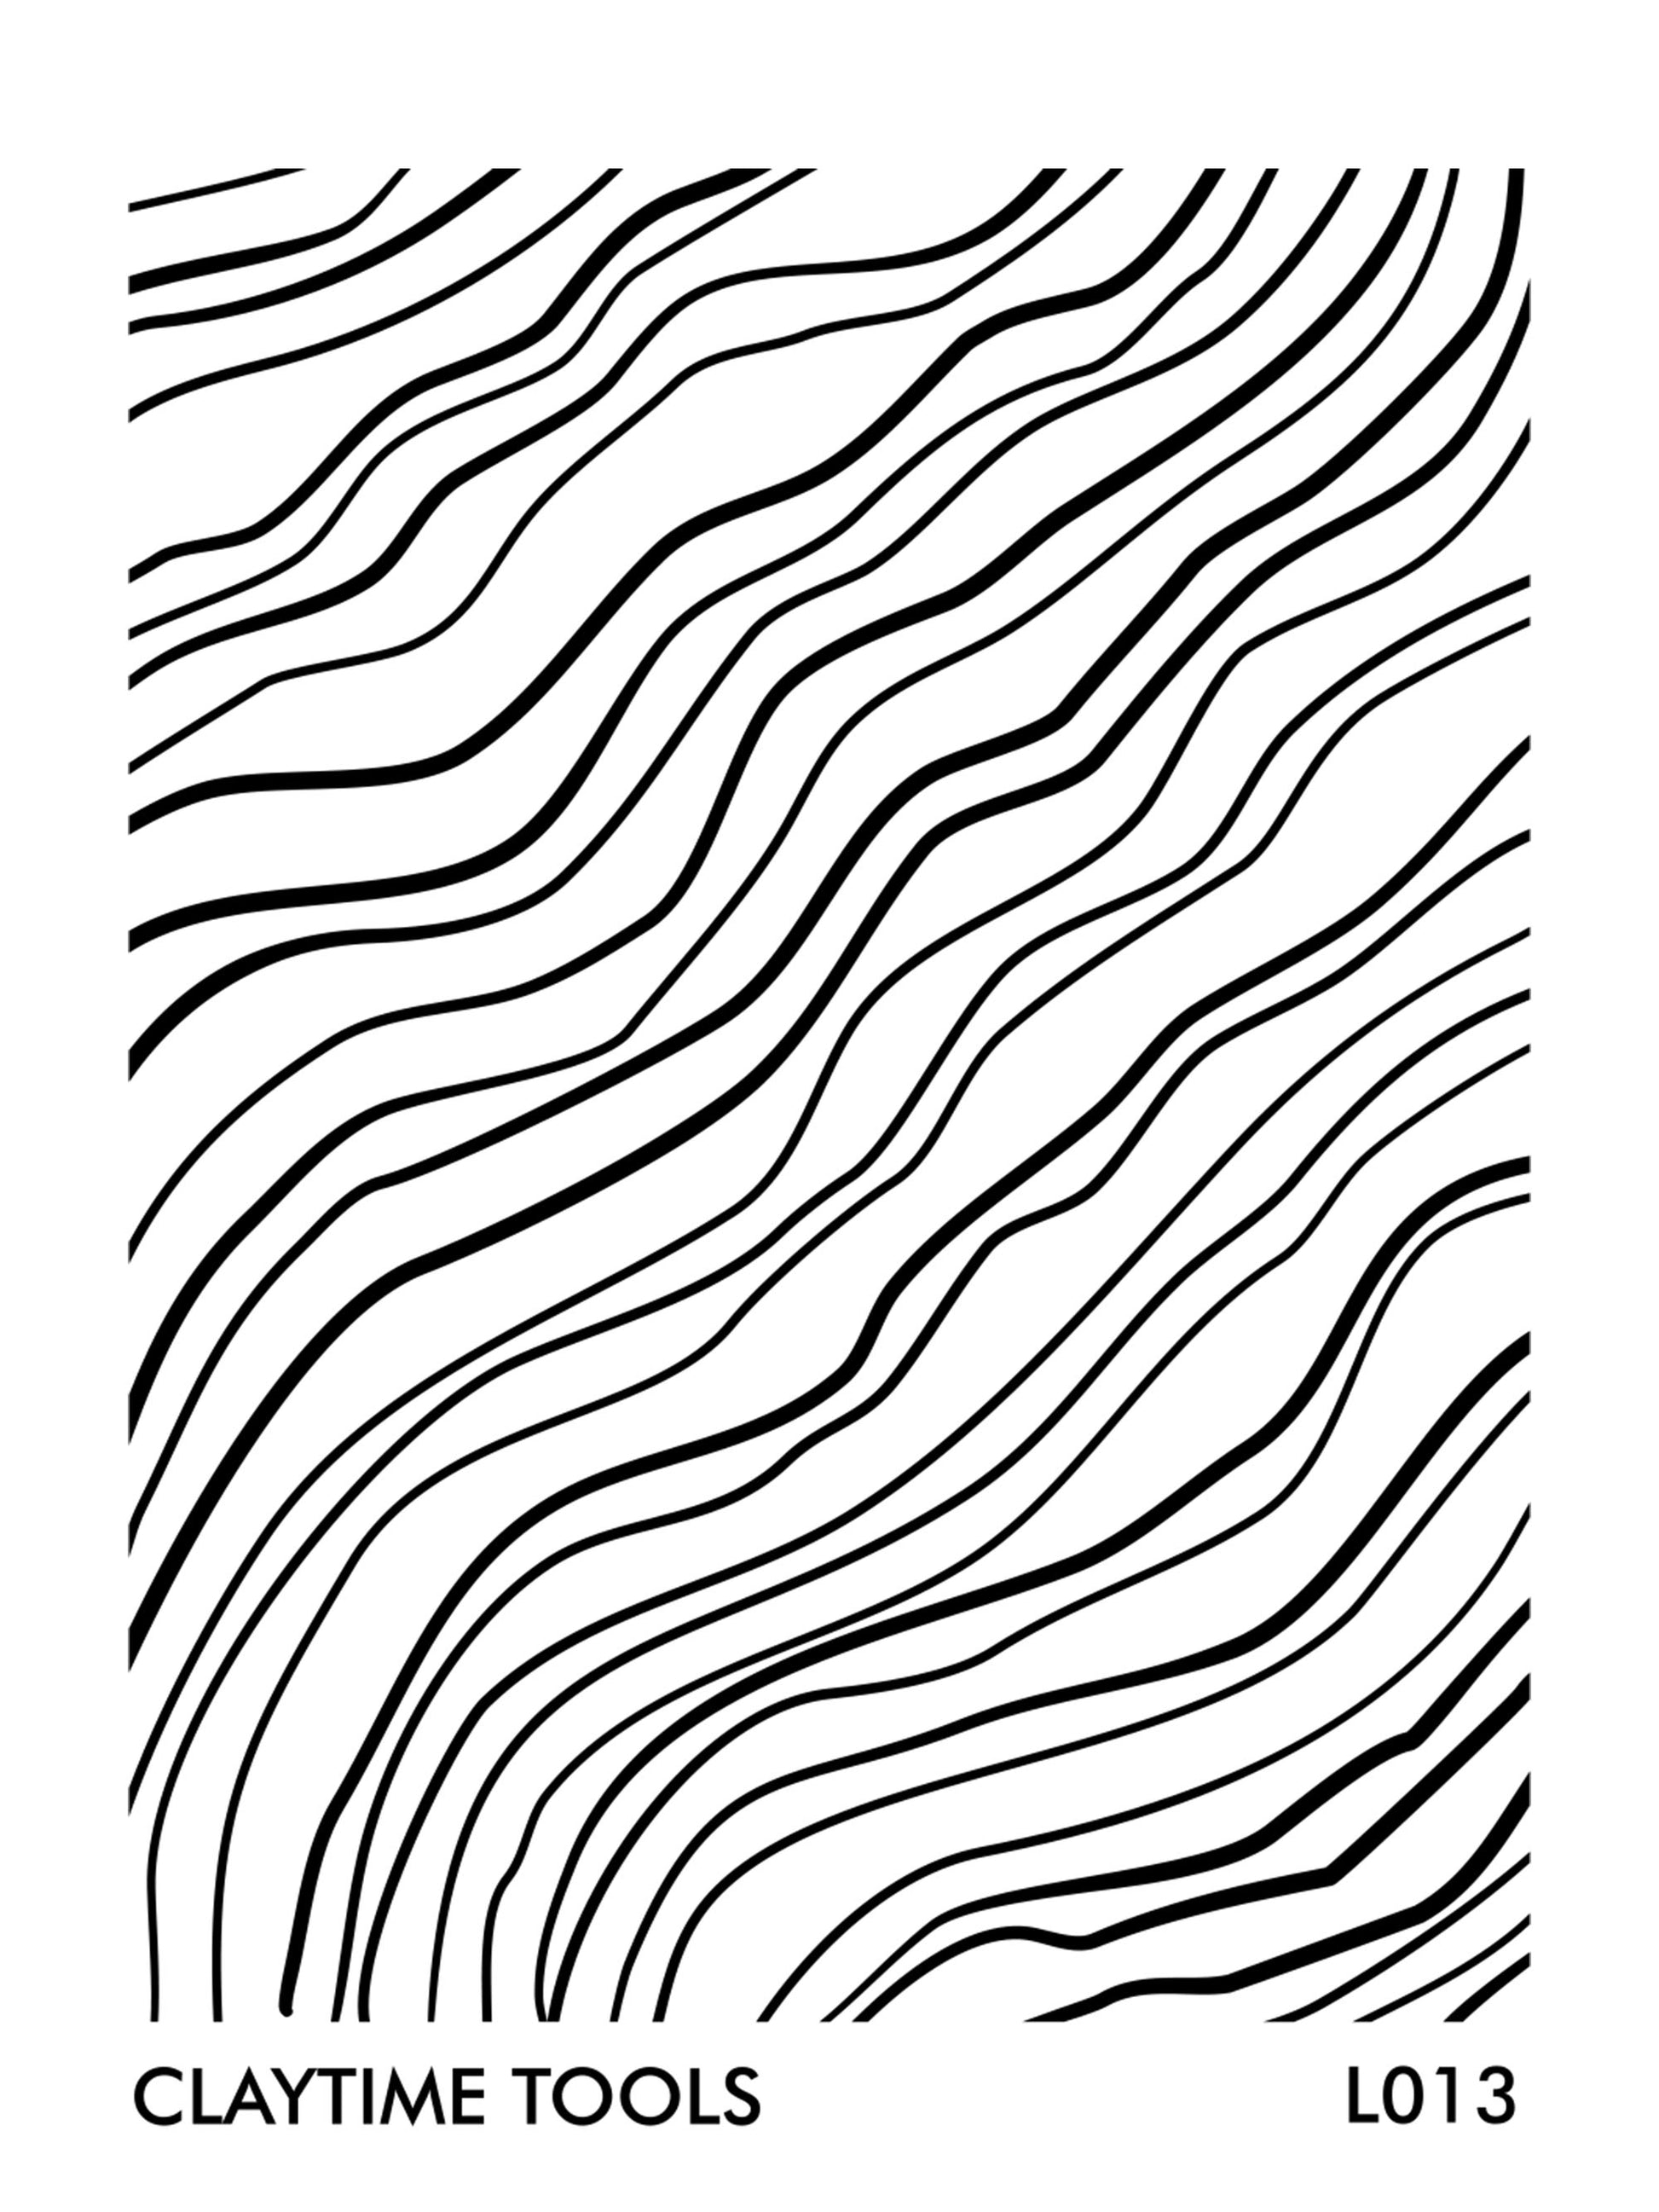 claytime tools black and white small silkscreen for clay with abstract lines